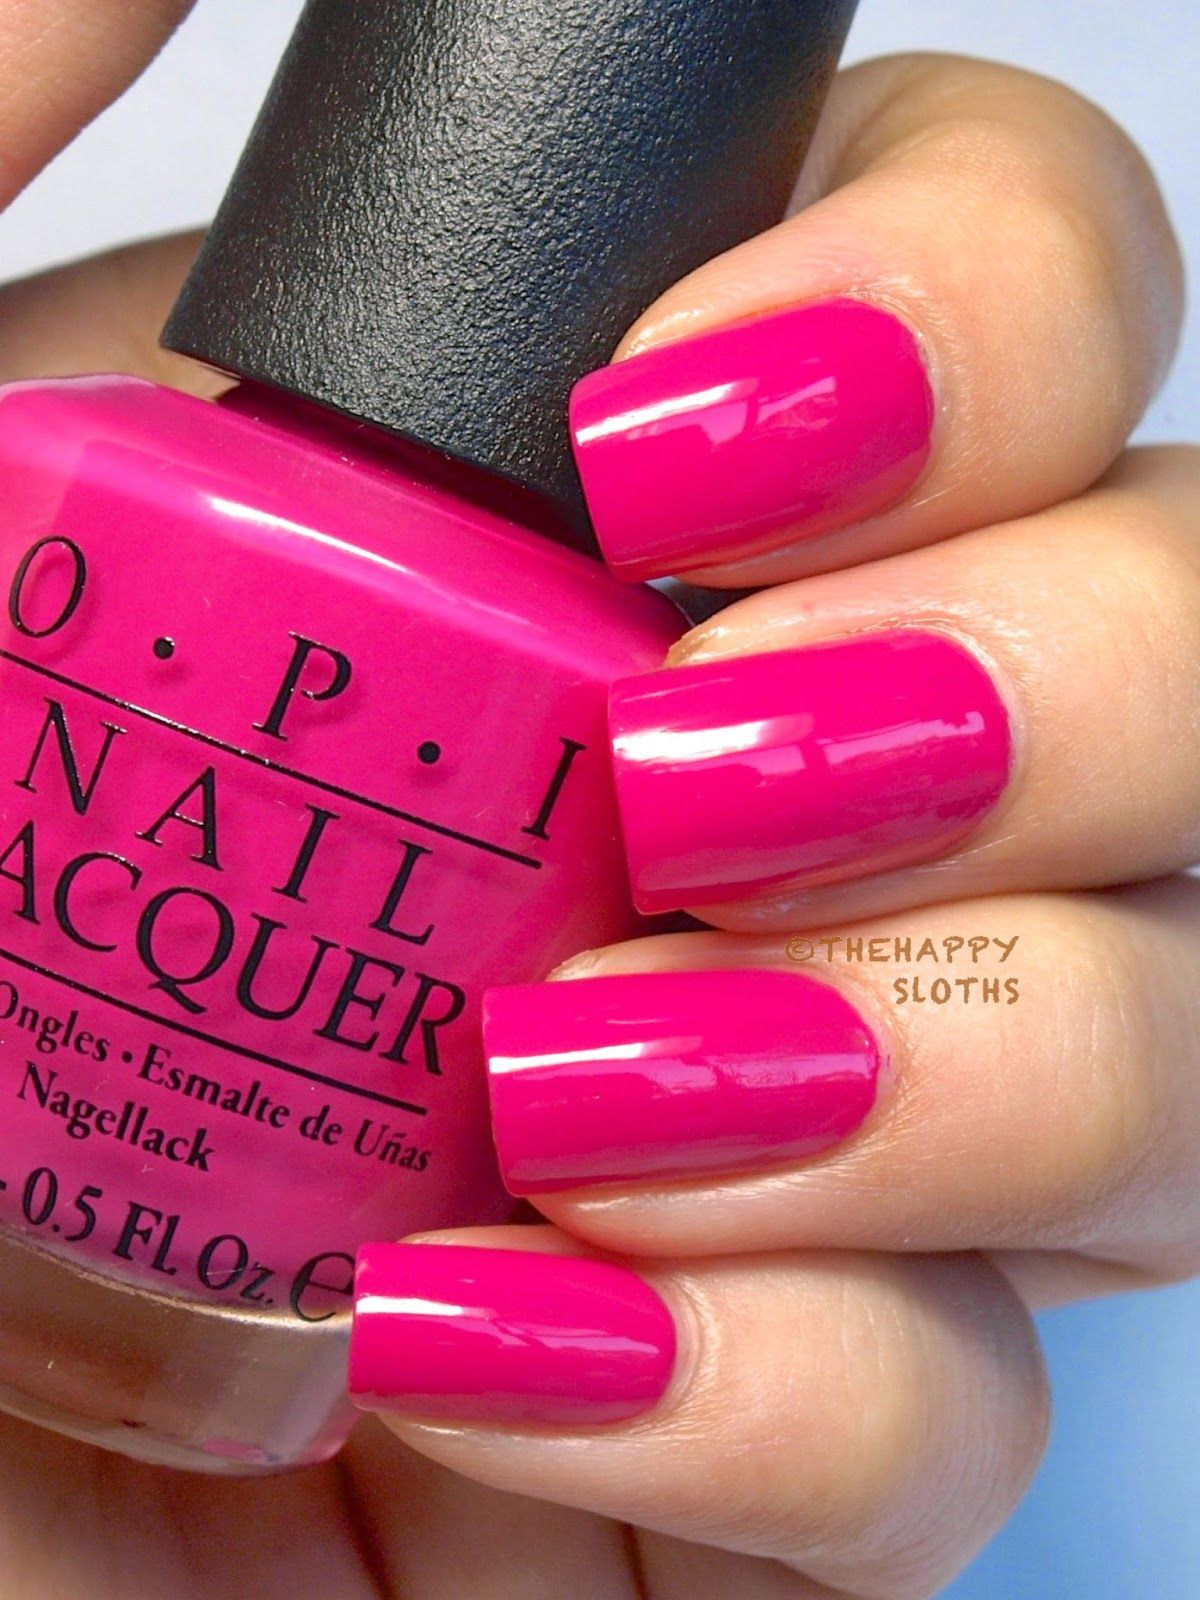 Opi Nail Colors
 The 25 best Opi red ideas on Pinterest